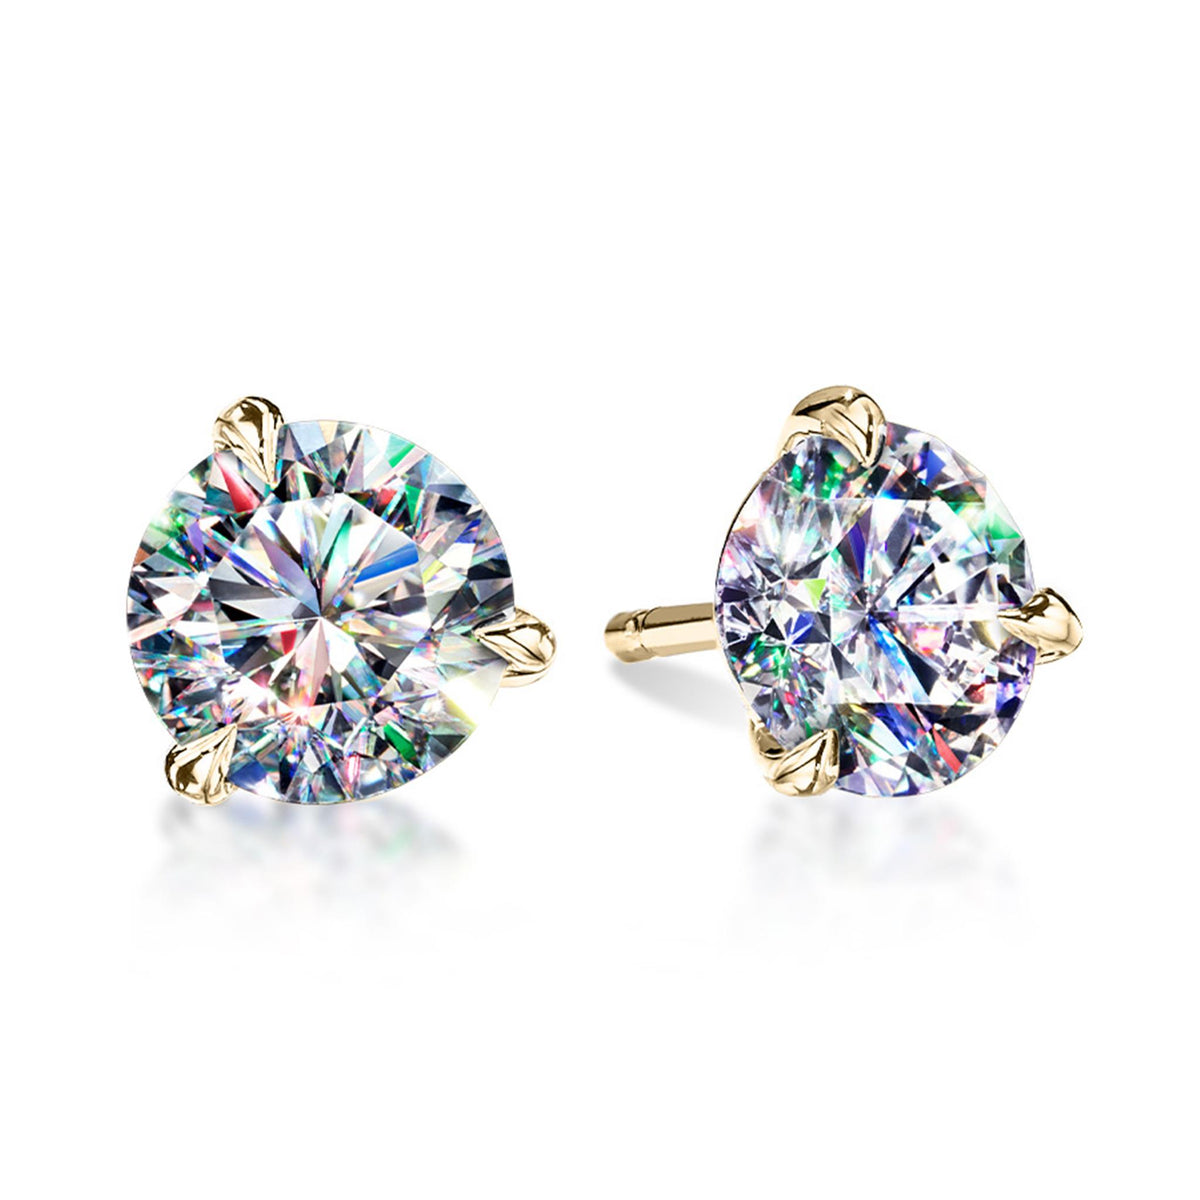 Facets Of Fire 14K White Gold Martini Stud Earrings With 2.13cttw Natural Diamonds